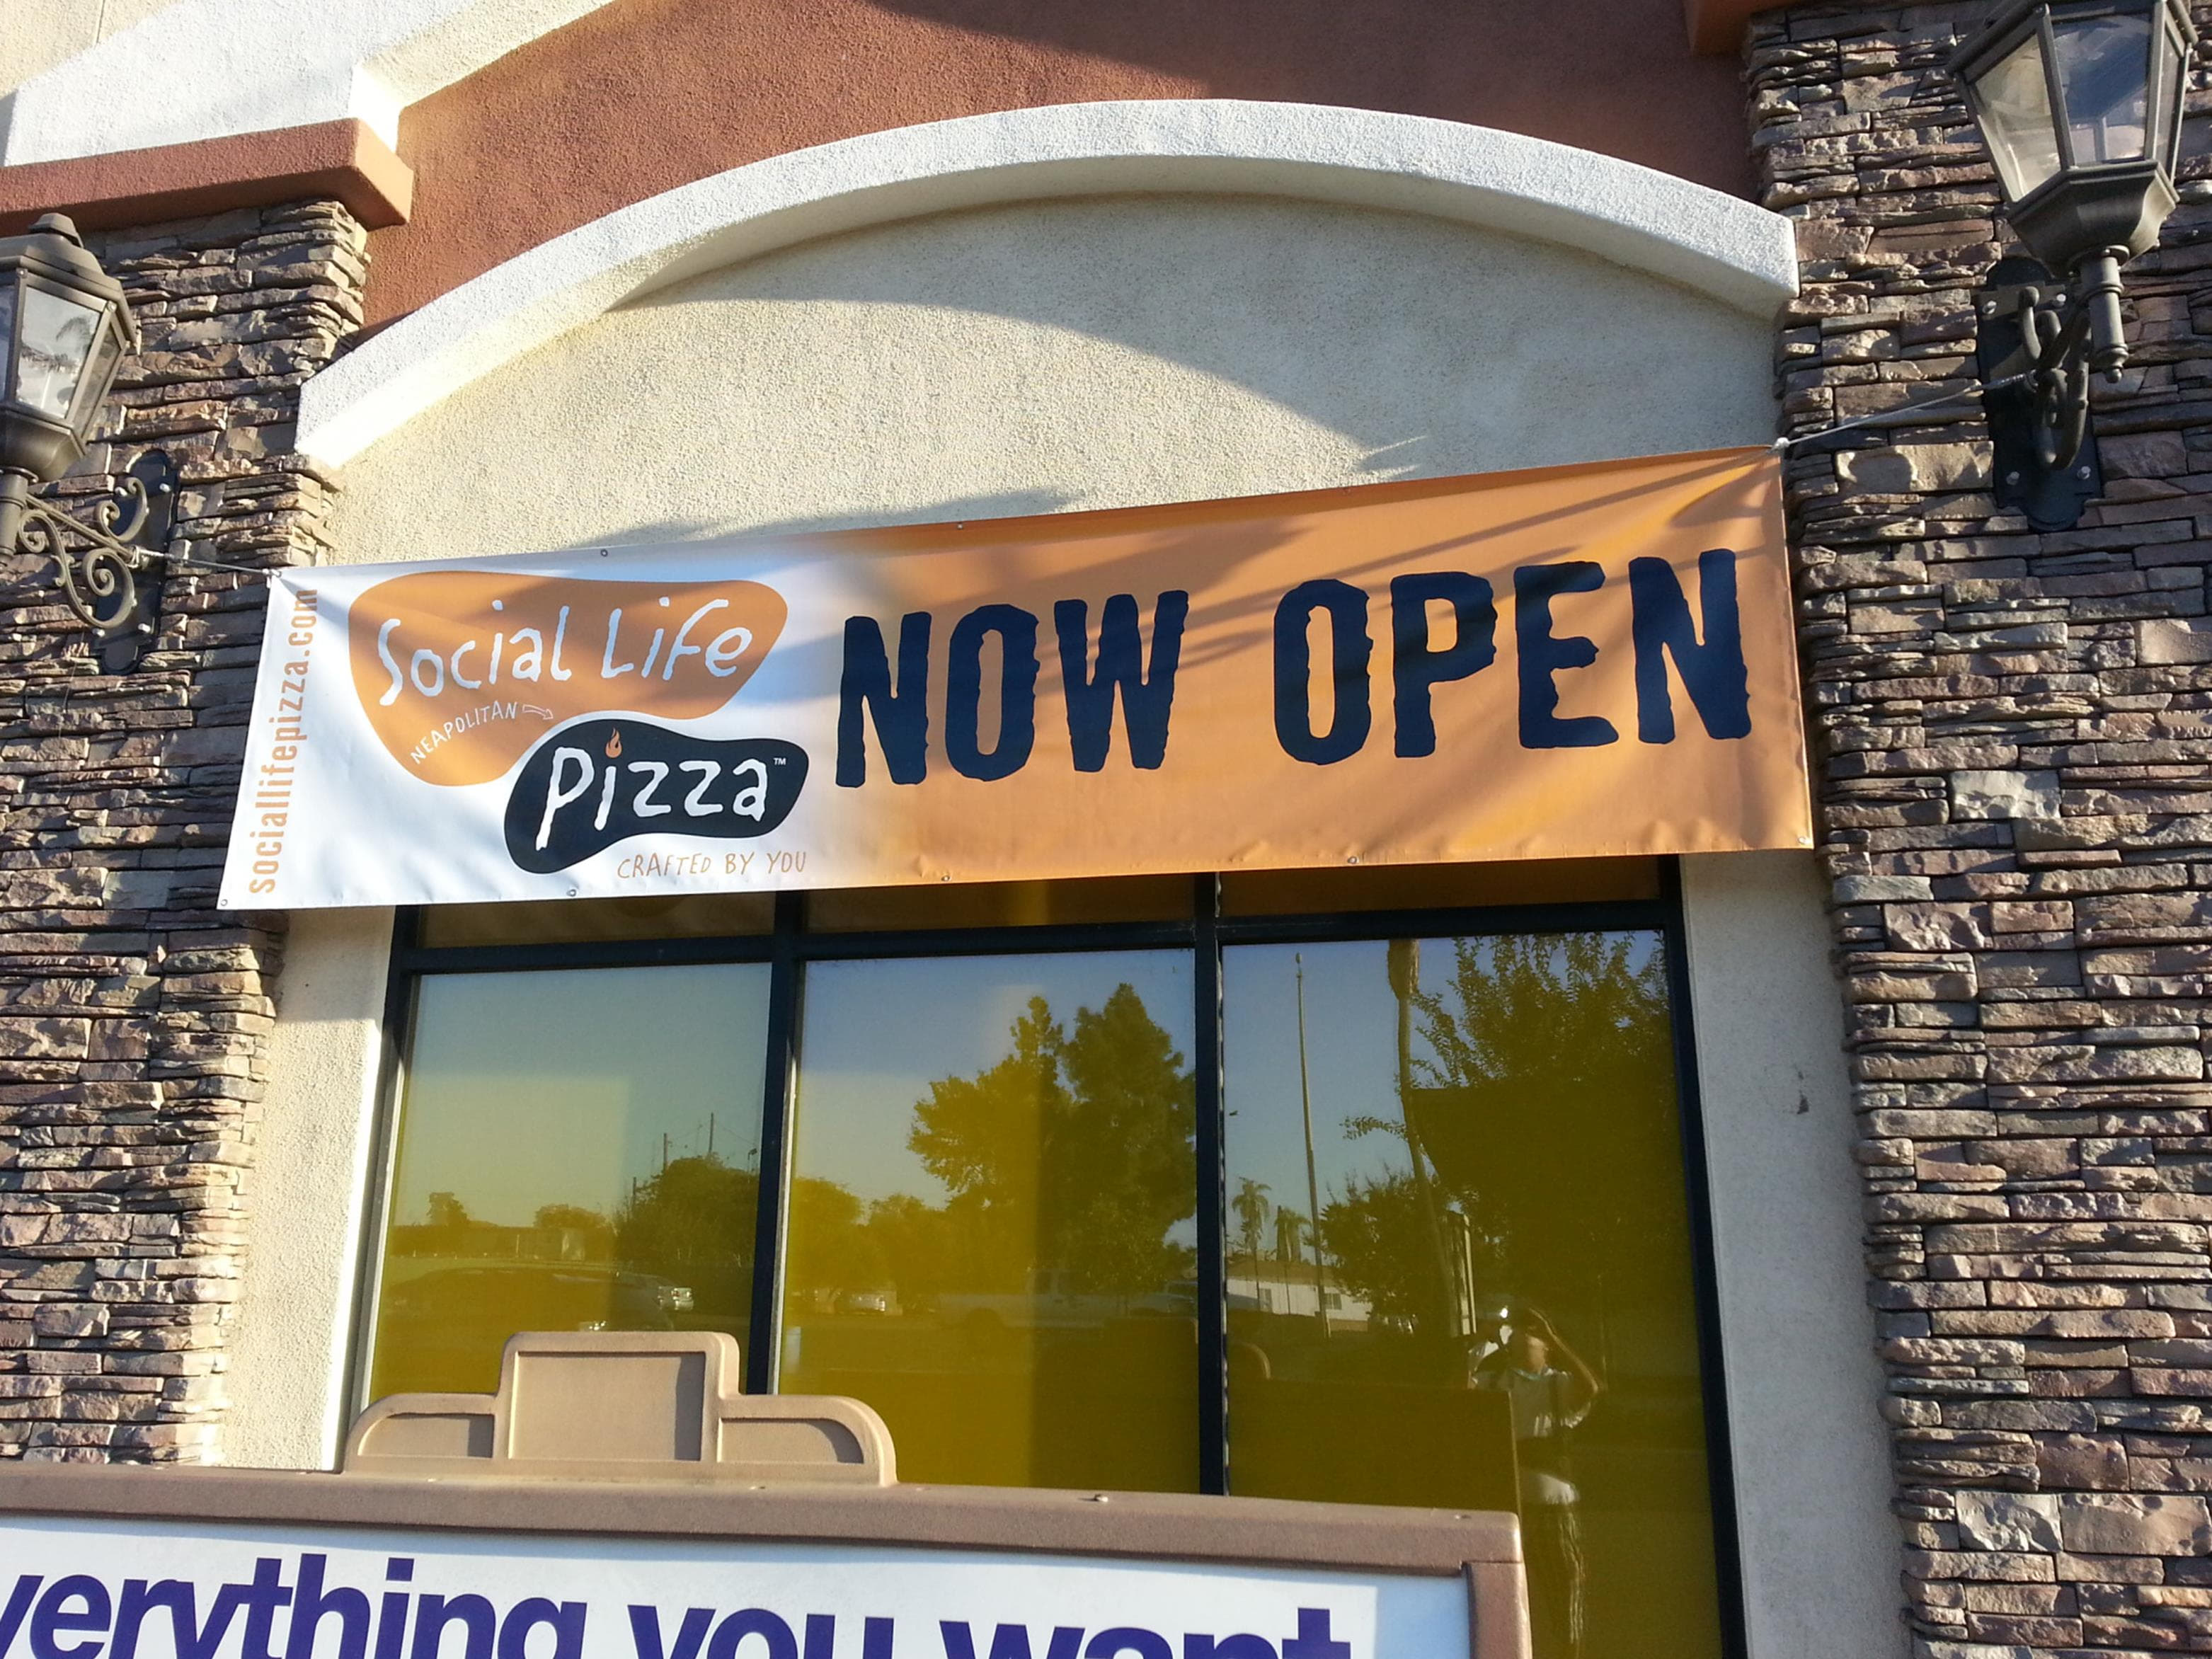 A pizza banner advertising its grand opening